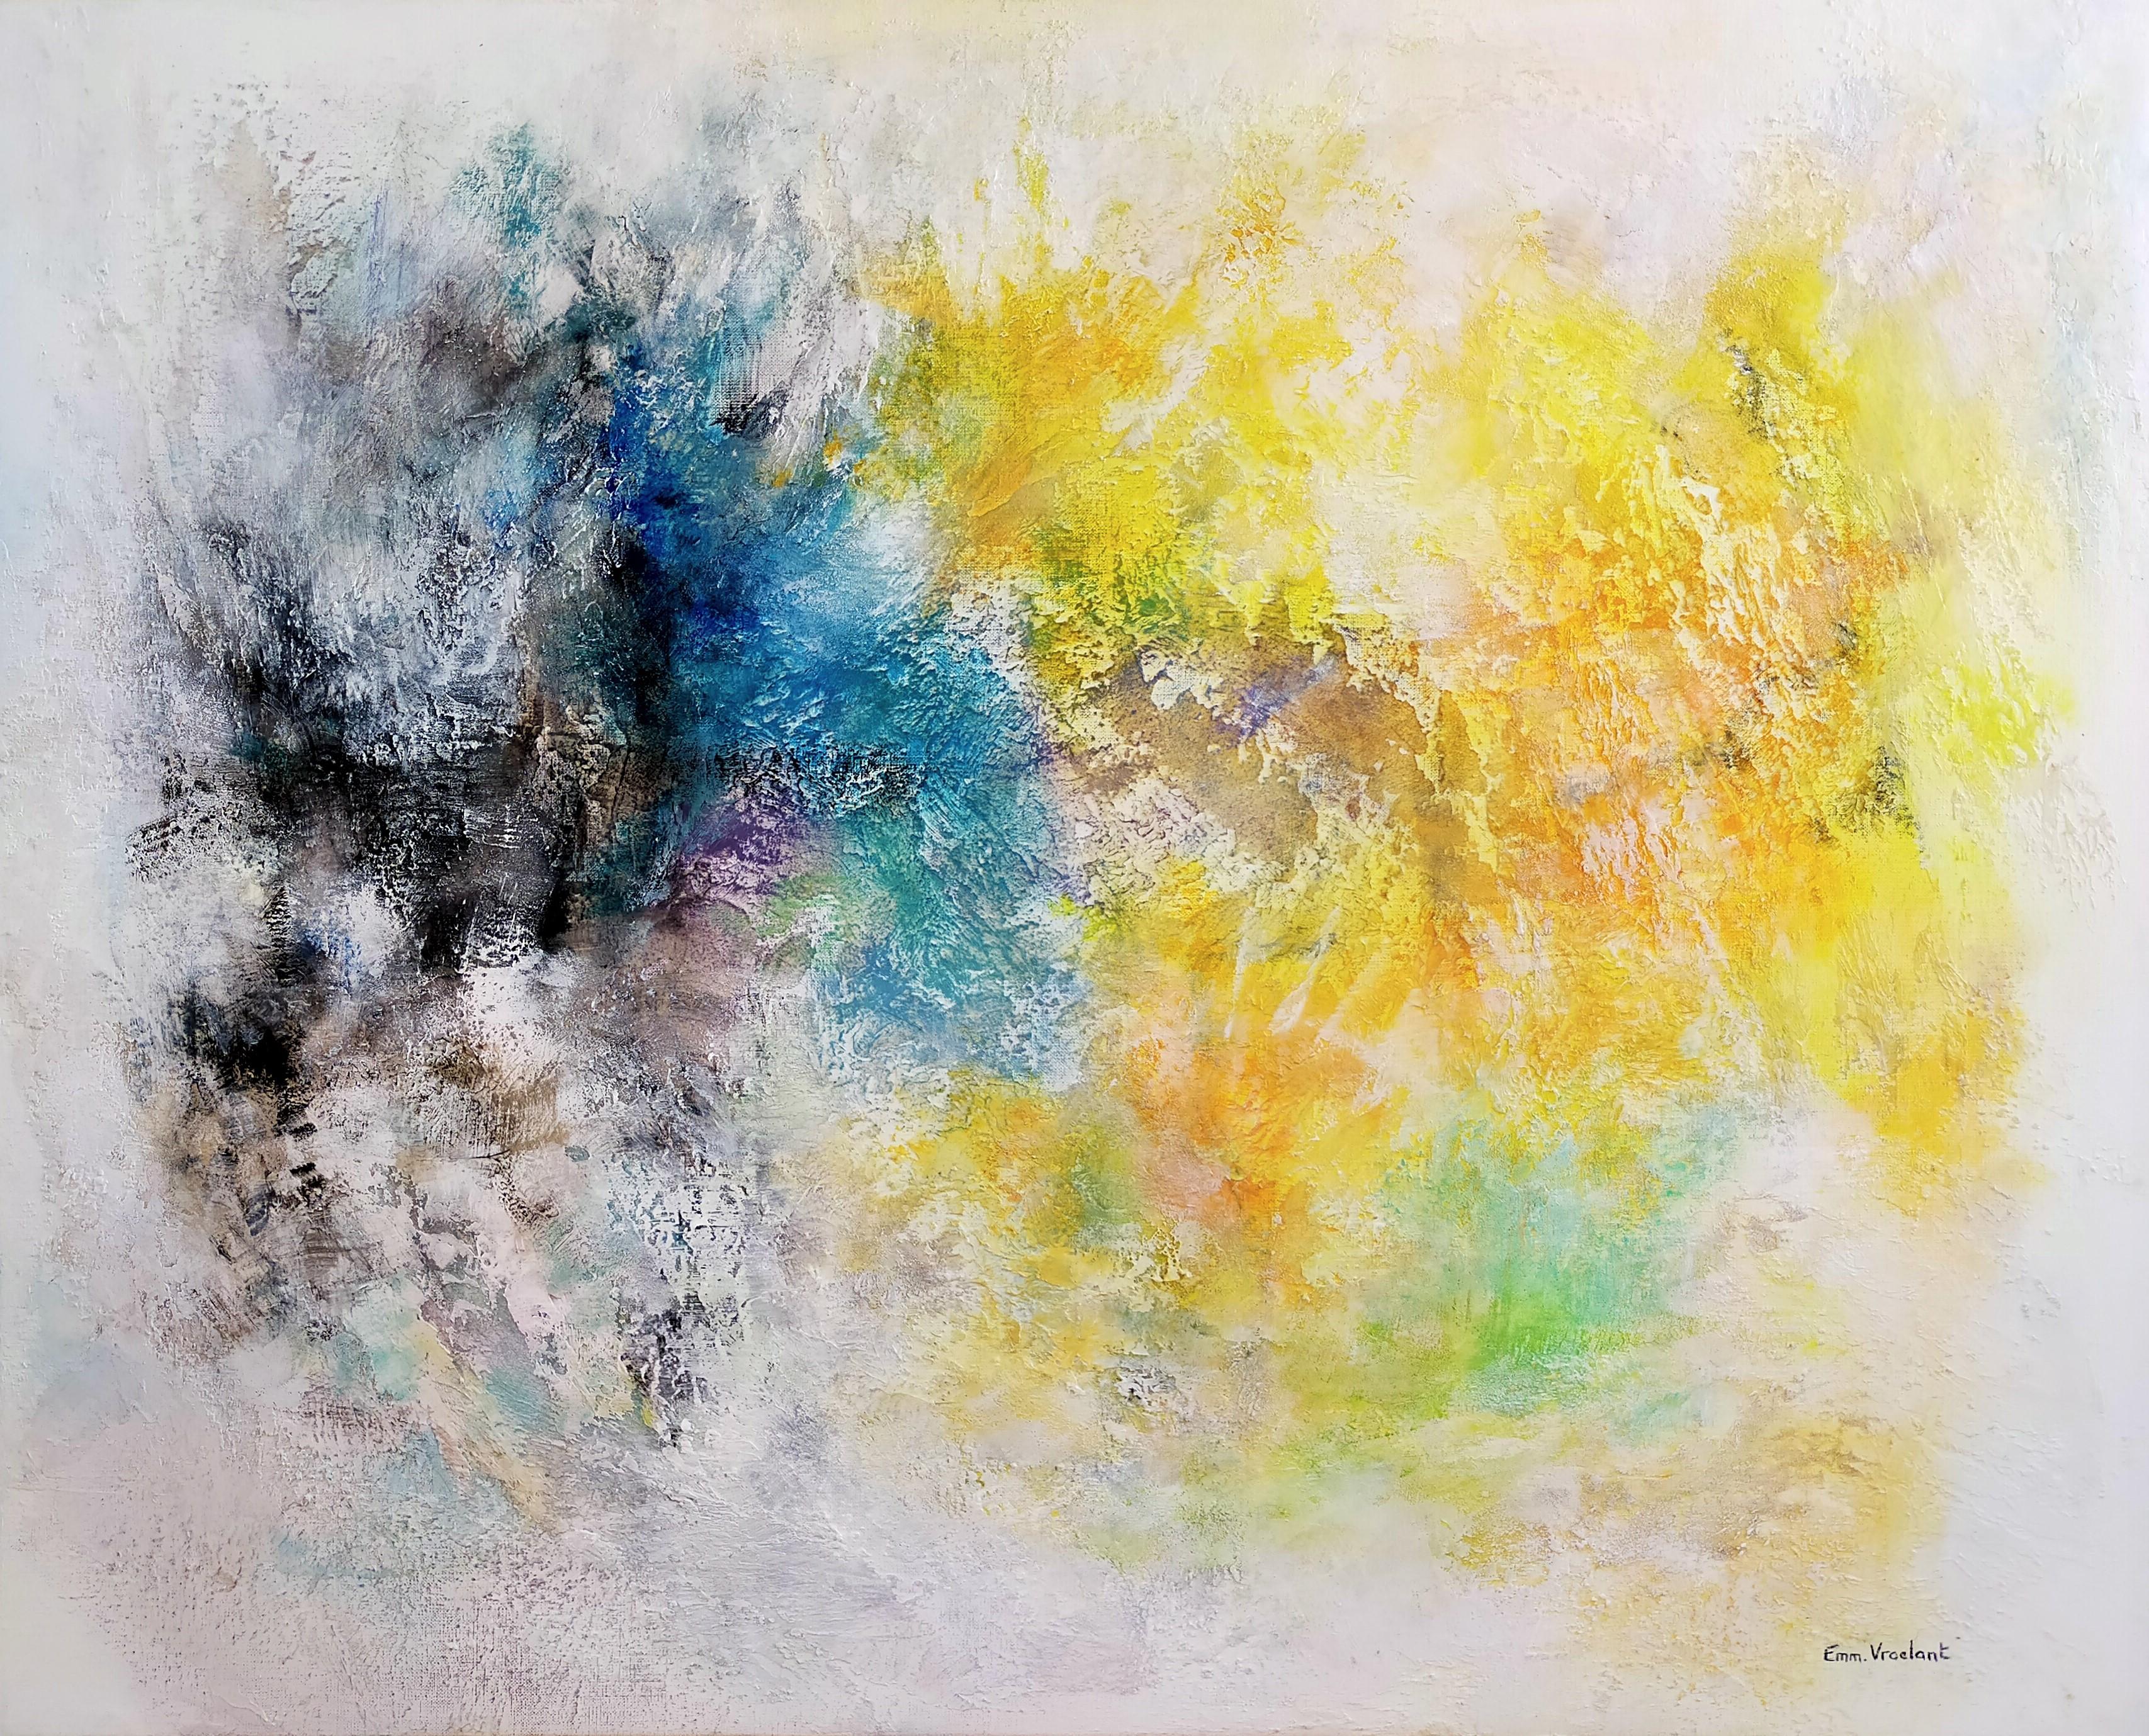  "Cherished freedom" abstract acrylic  poudre de marbre  100x82cm 2022